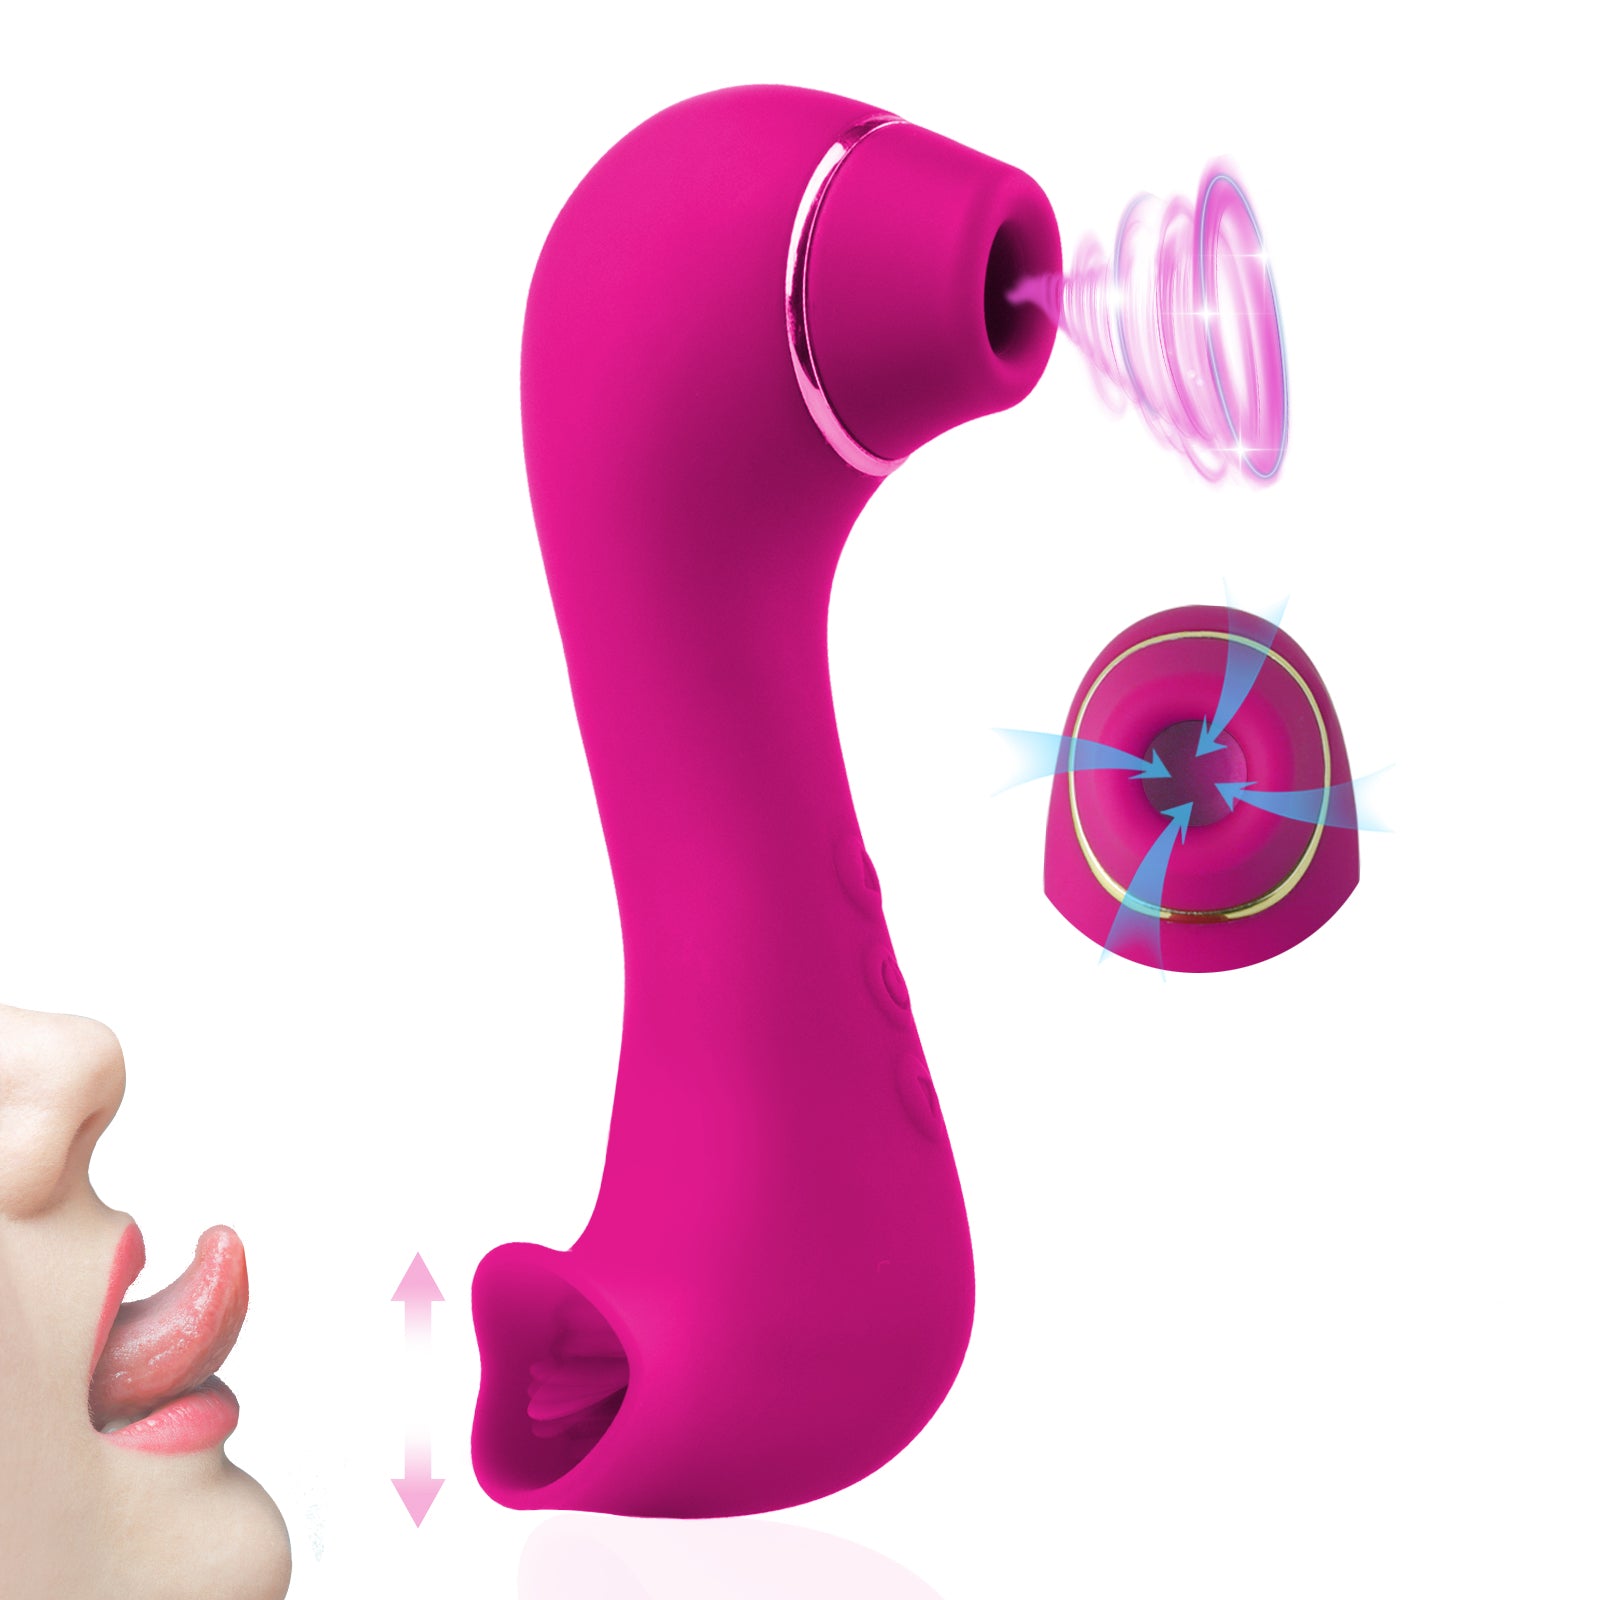 Clitoral Sucking and Licking 2 in 1 G Spot Vibrator for Double Stimulati